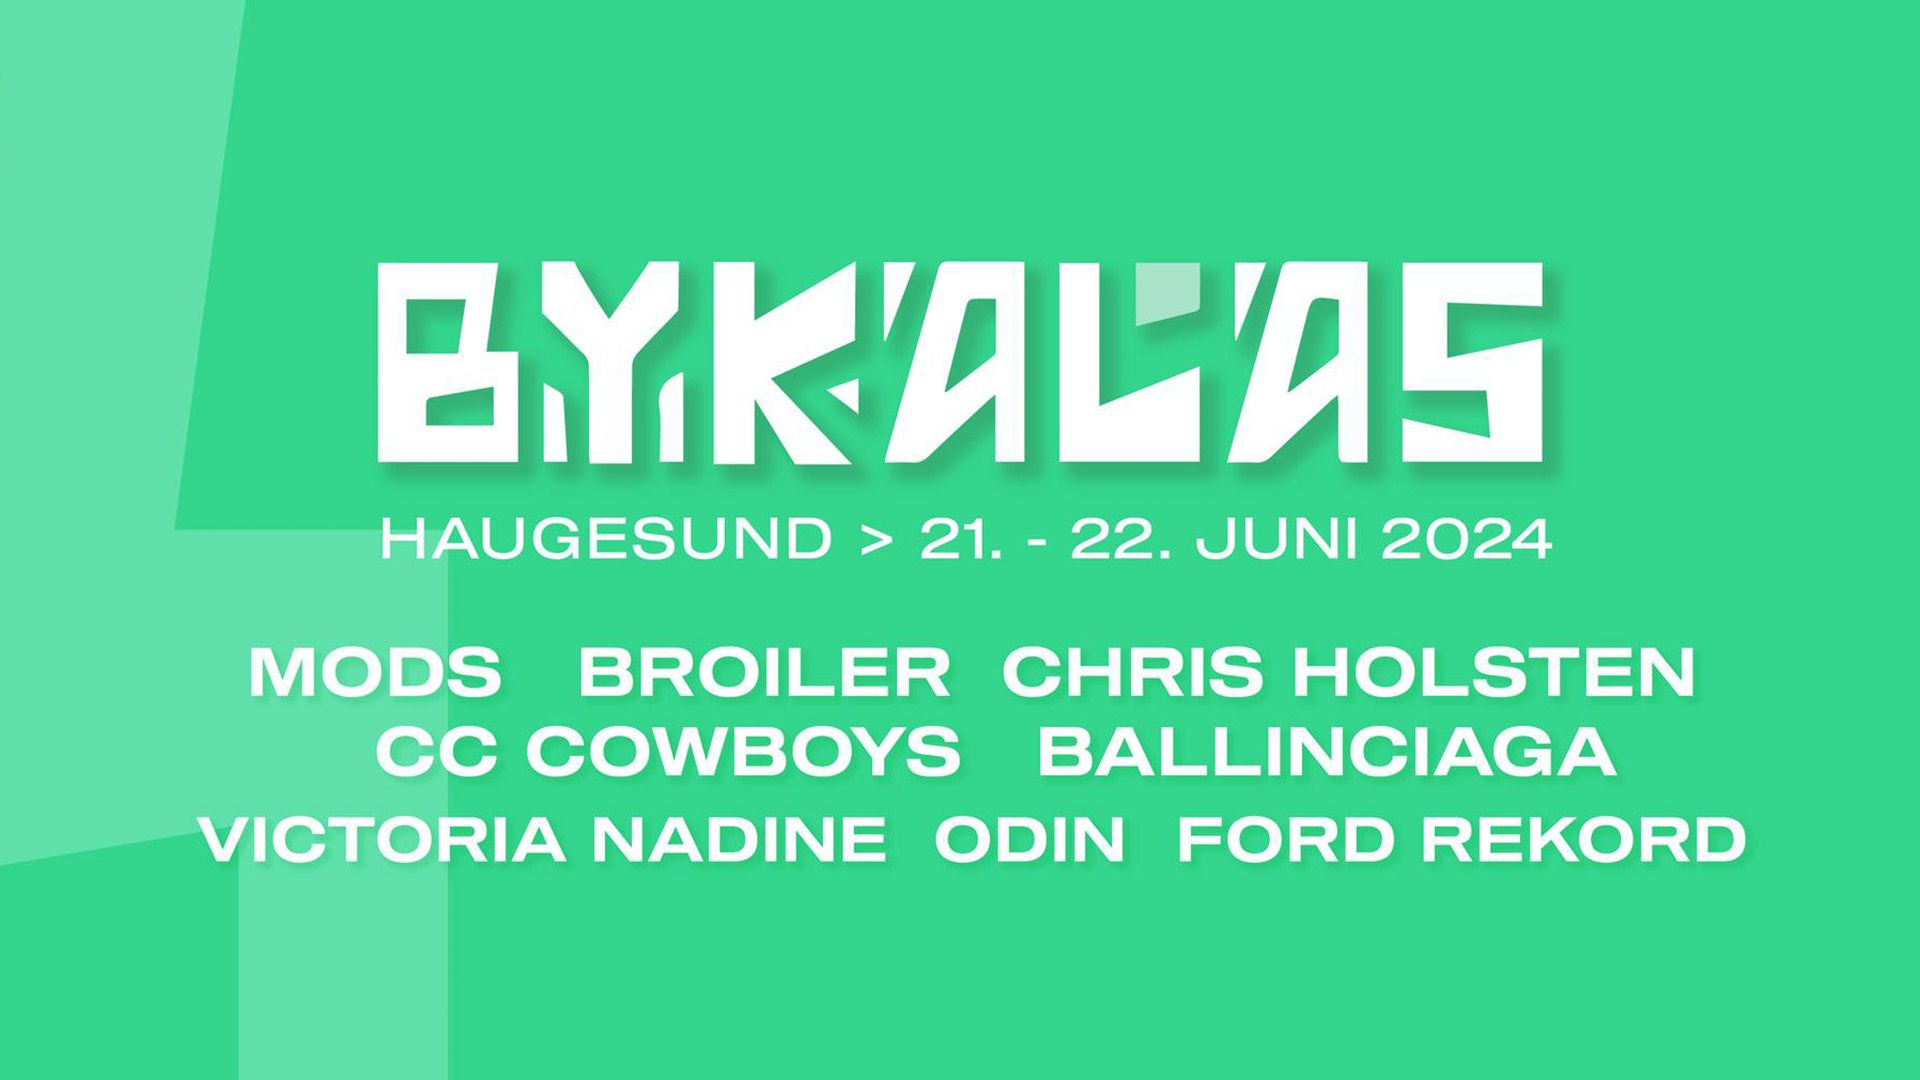 Cover Image for Bykalas chooses Broadcast as their official festival app!